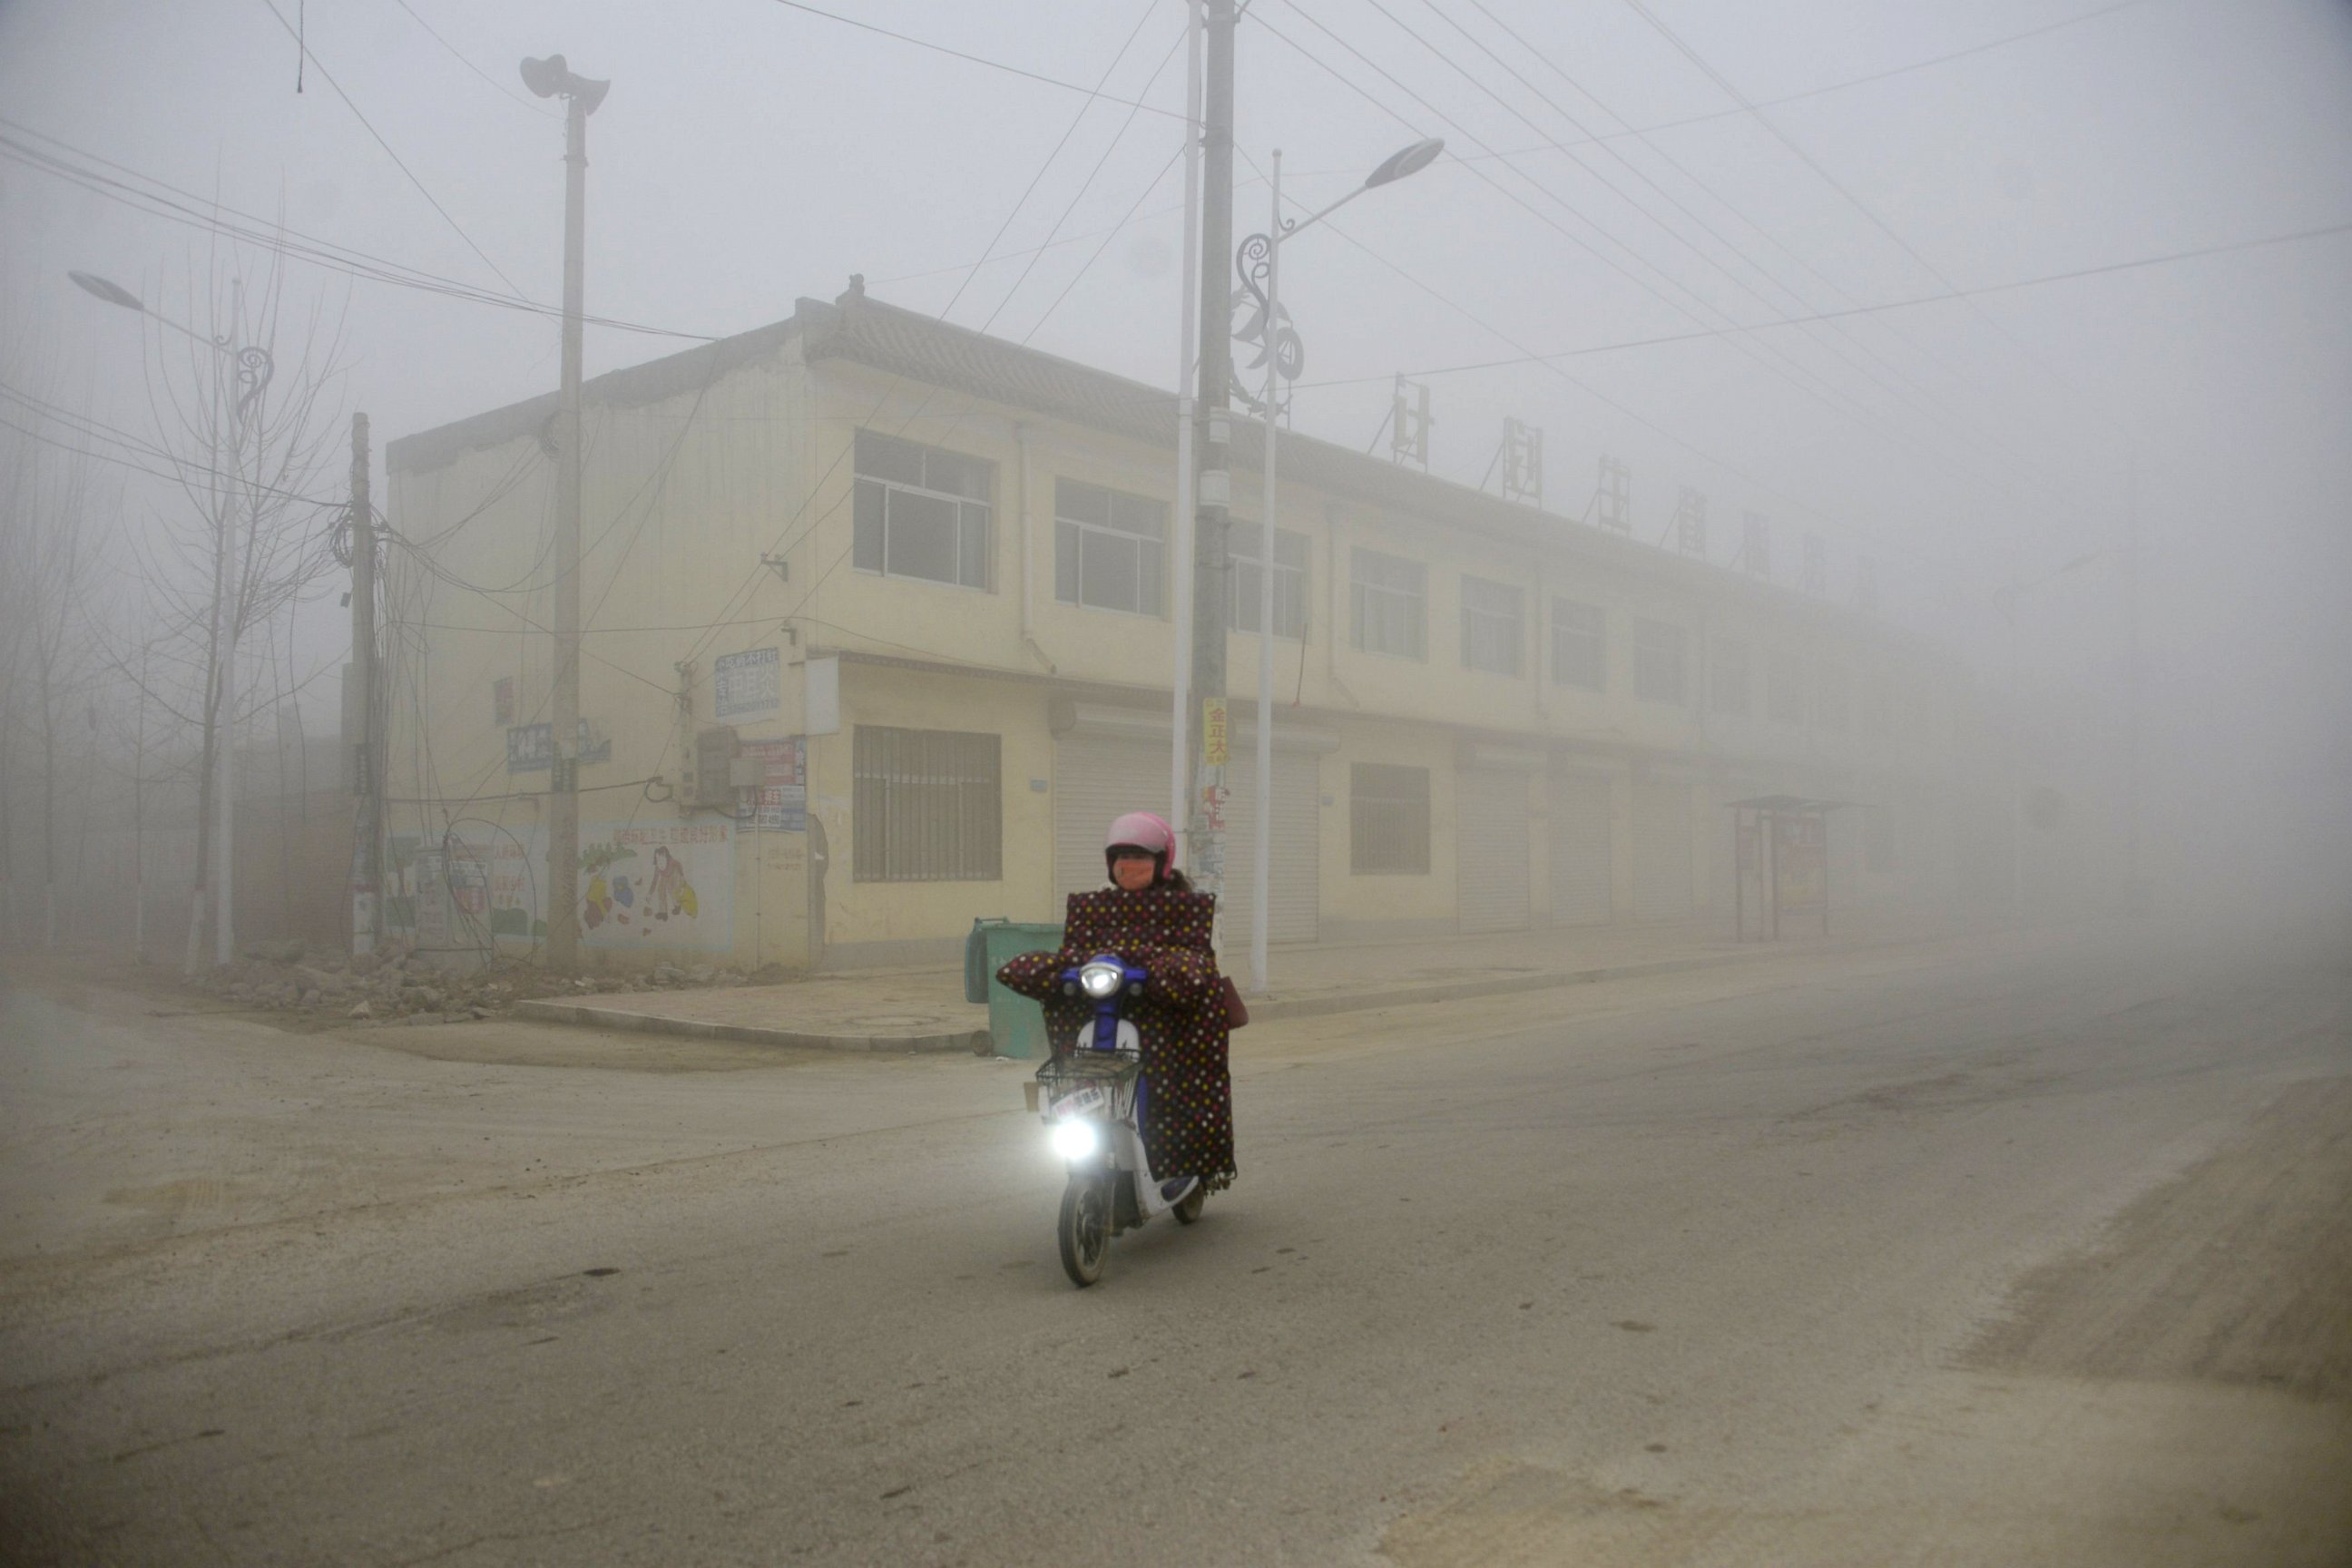 PHOTO: A cyclist rides along a street in heavy smog during a polluted day in Liaocheng, Shandong province, China, Dec. 20, 2016. 